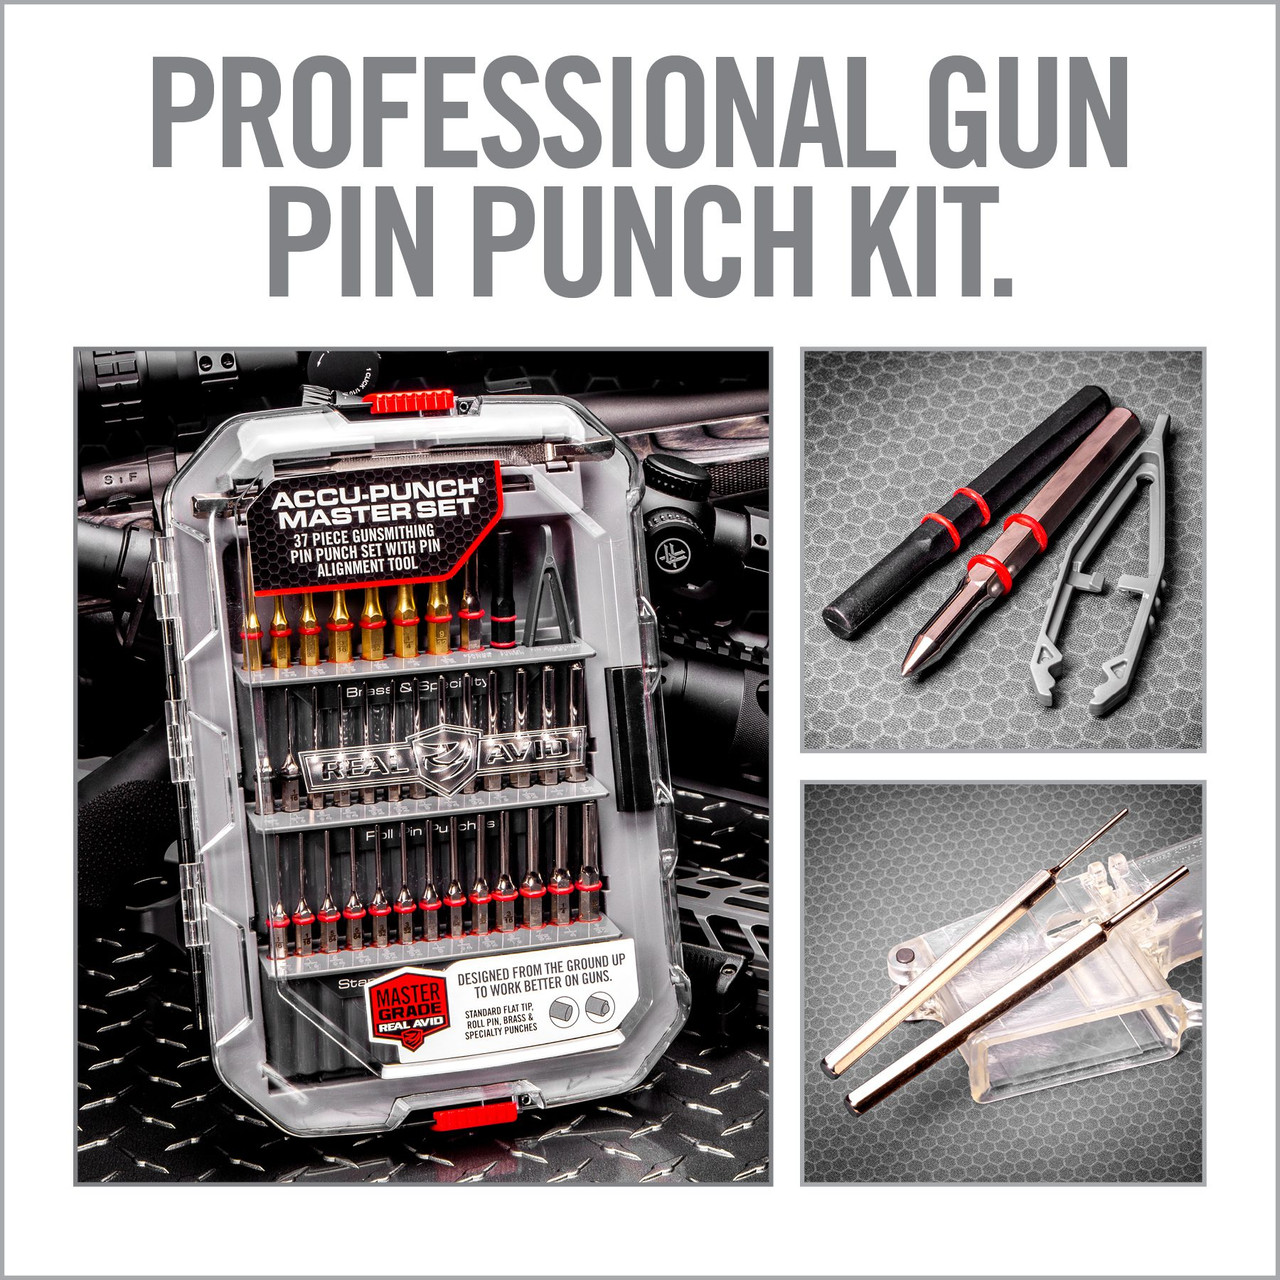 Real Avid Accu-Punch Master Set - 37 Piece Punch Set, Includes 13